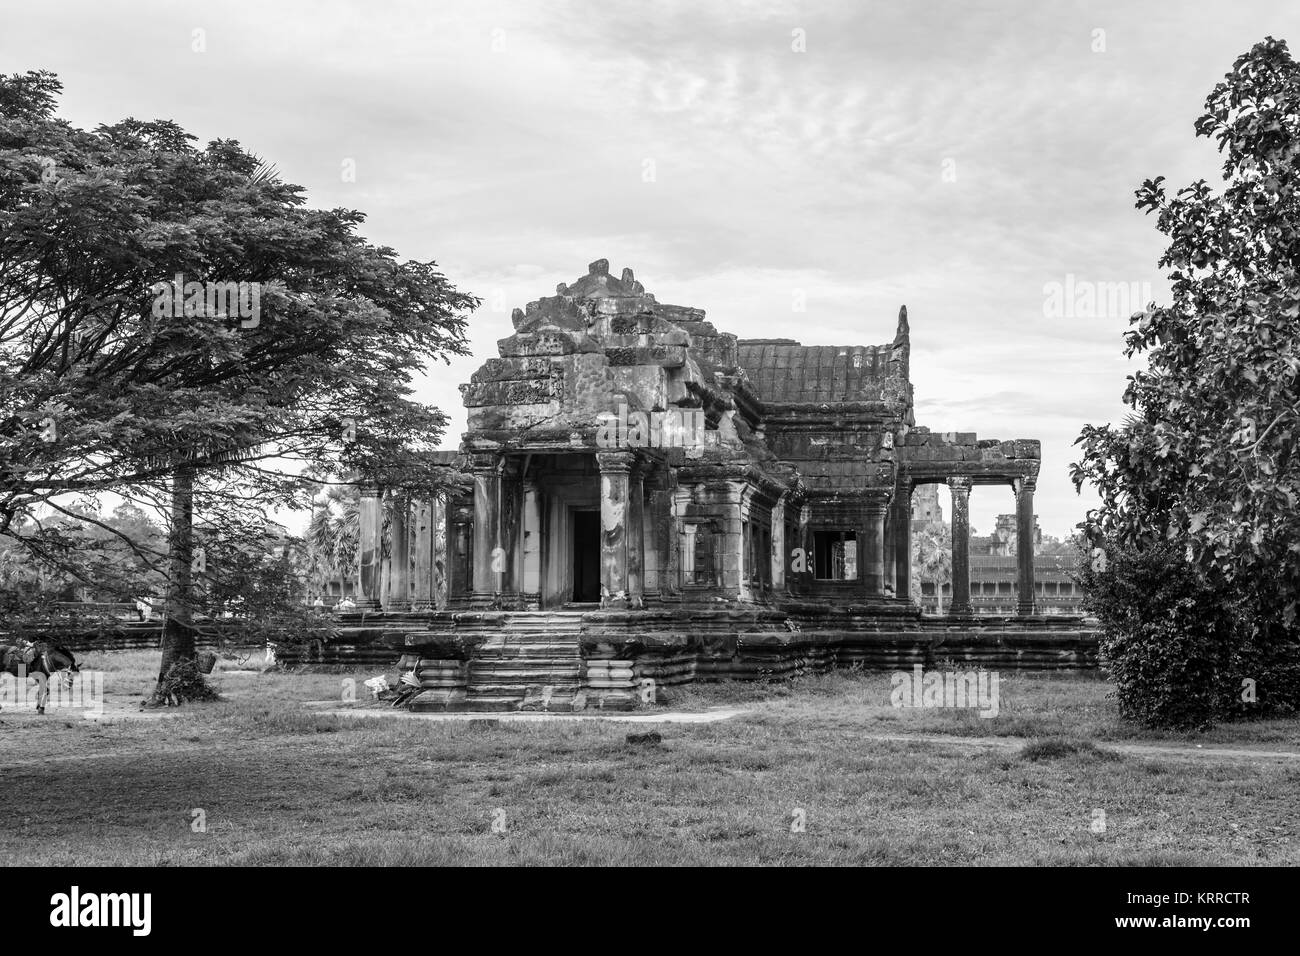 Dilapidated South Library building in the grounds of Angkor Wat, a temple complex near Siem Reap in Cambodia, the world's largest religious monument Stock Photo